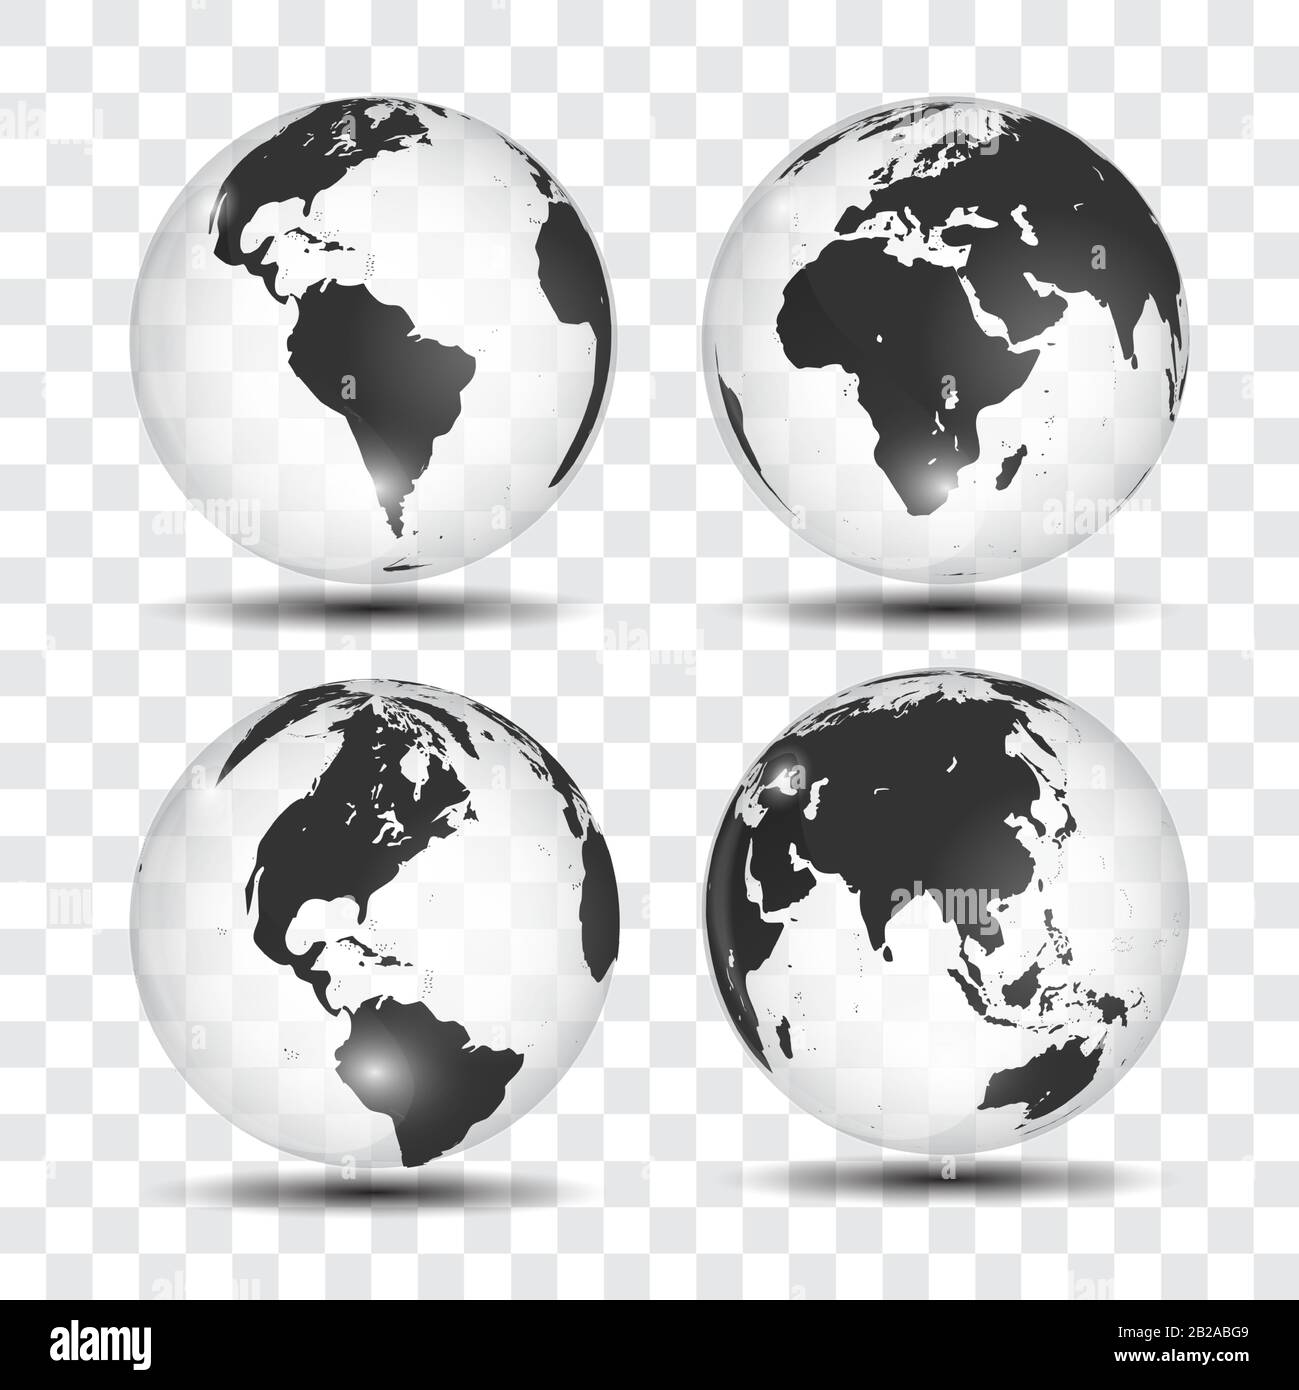 Realistic world map in globe shape of Earth on Transparent Background ...